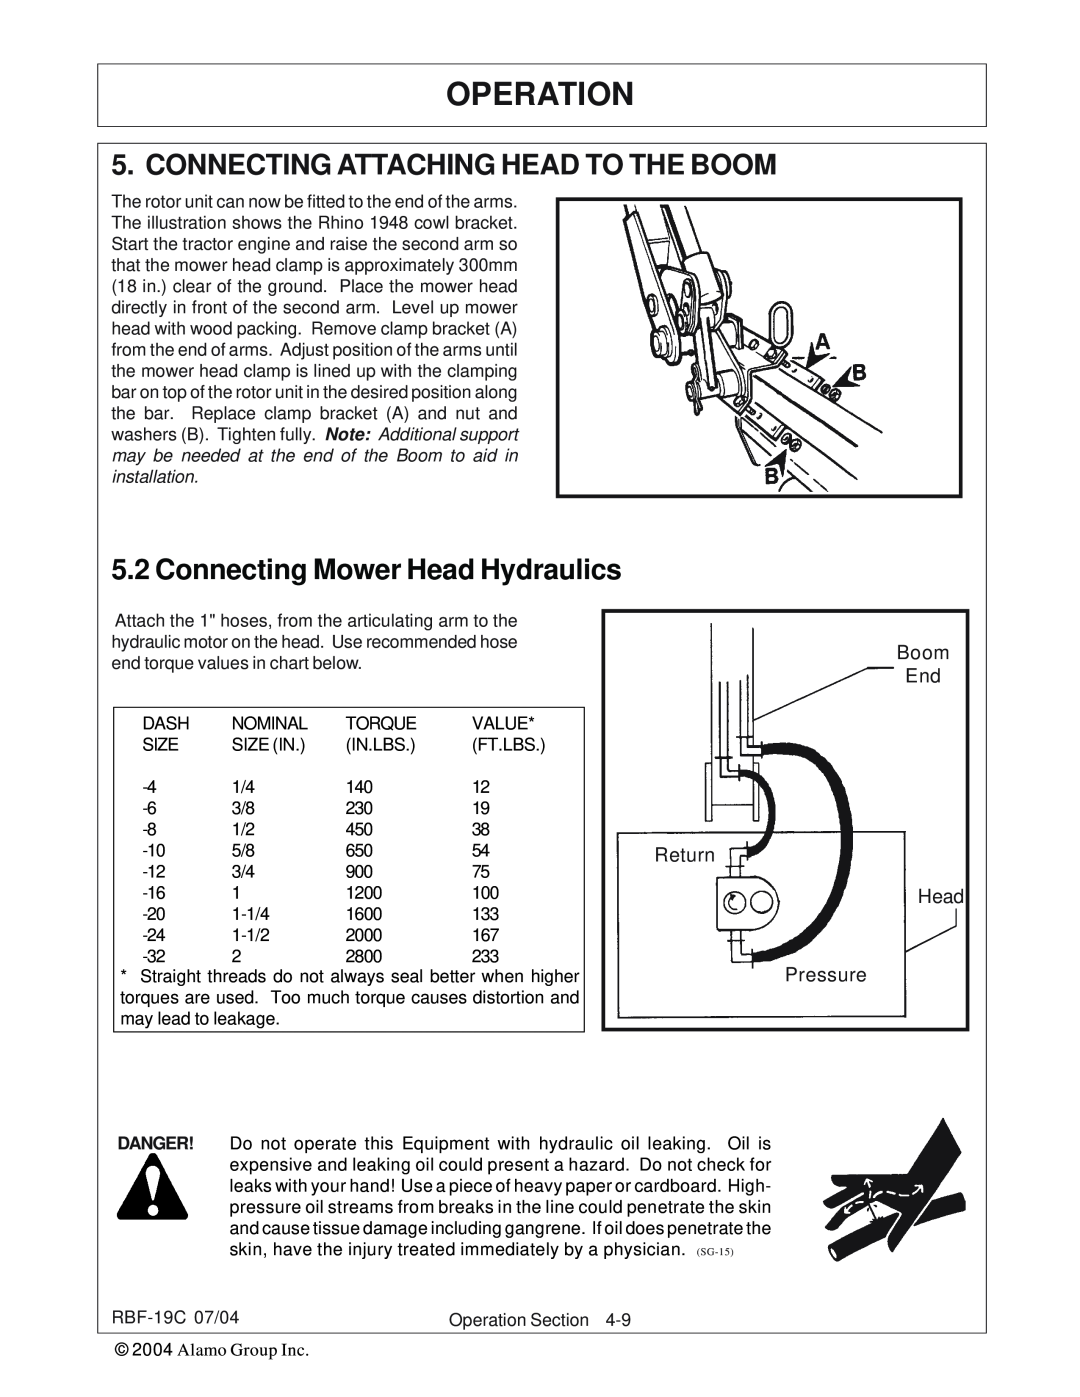 Tiger RBF-19C manual Connecting Attaching Head To The Boom, Connecting Mower Head Hydraulics, Operation 